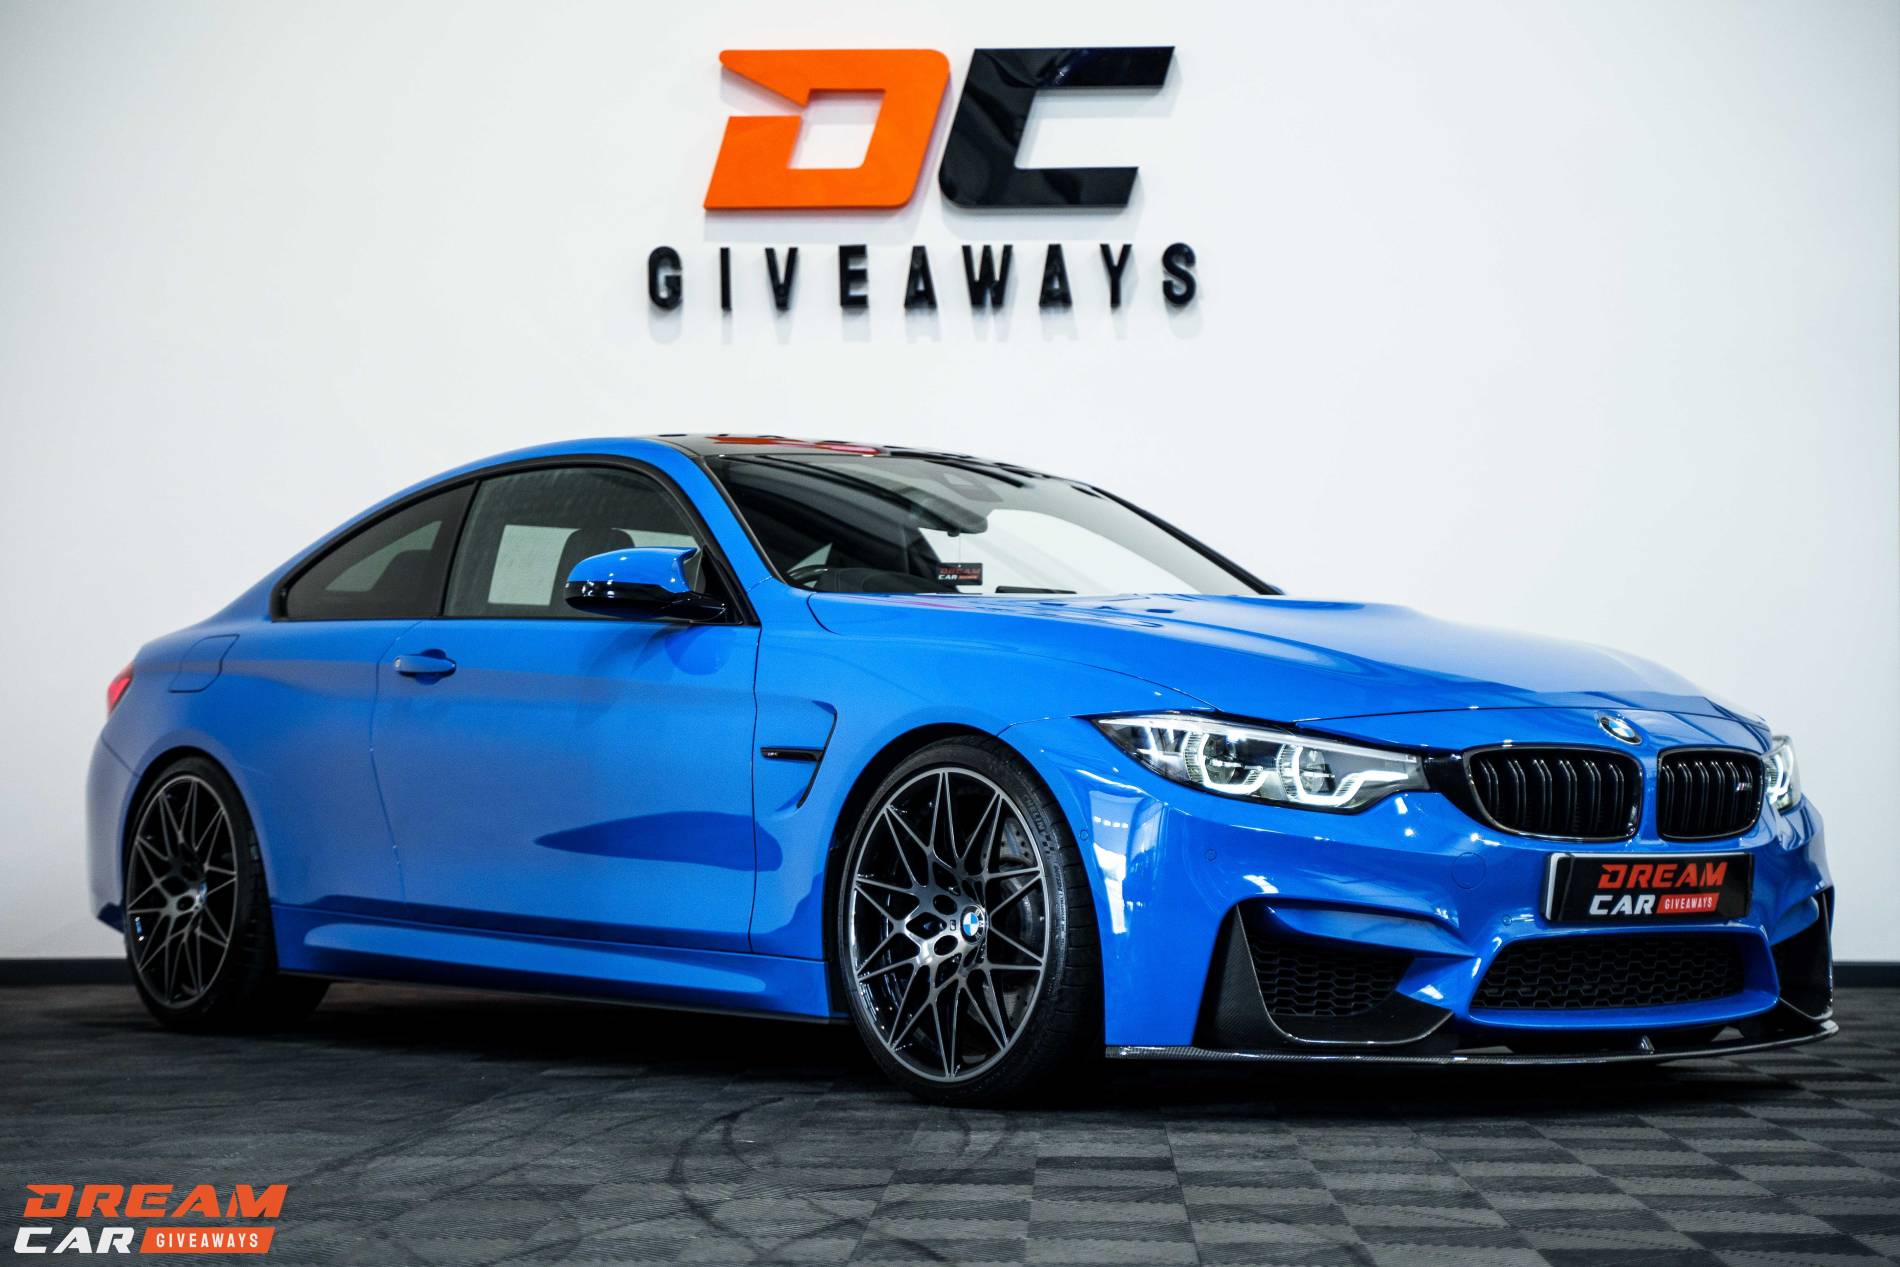 Win this 2020 BMW M4 Competition & £1,000 or £35,000 Tax Free